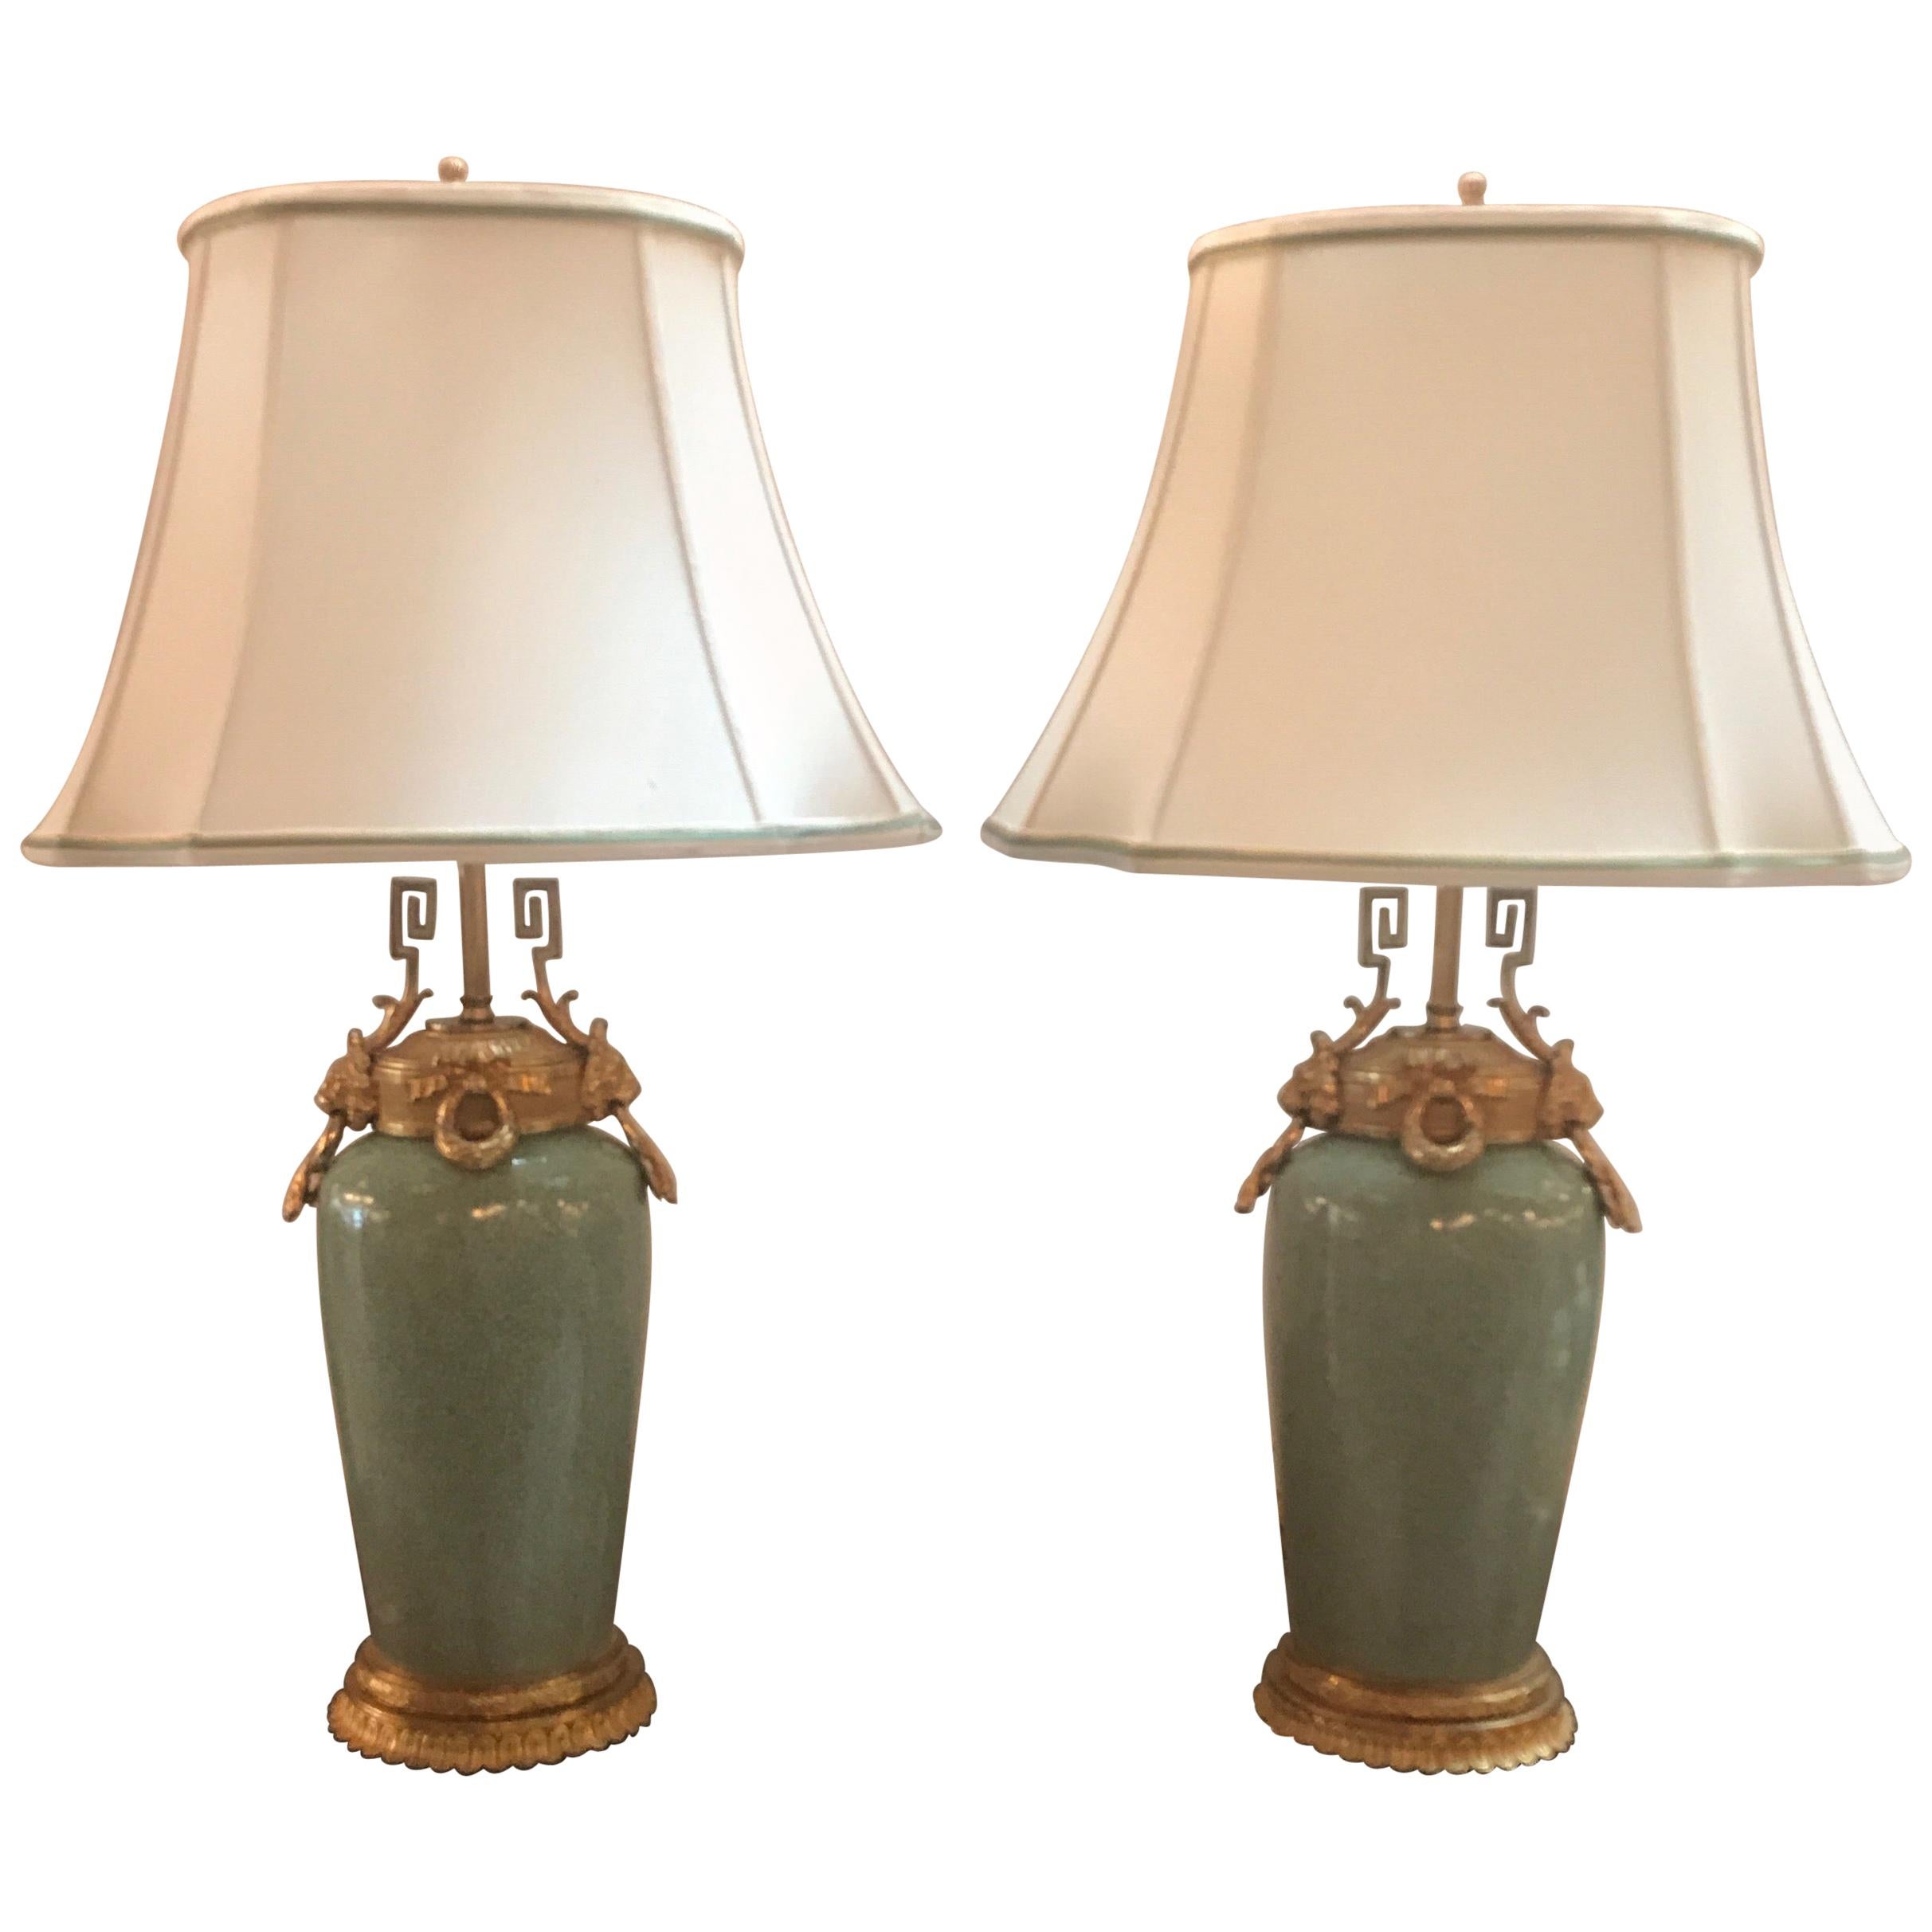 Pair of Chinese Celadon Porcelain Urn Lamp with Later French Ormolu Mounts